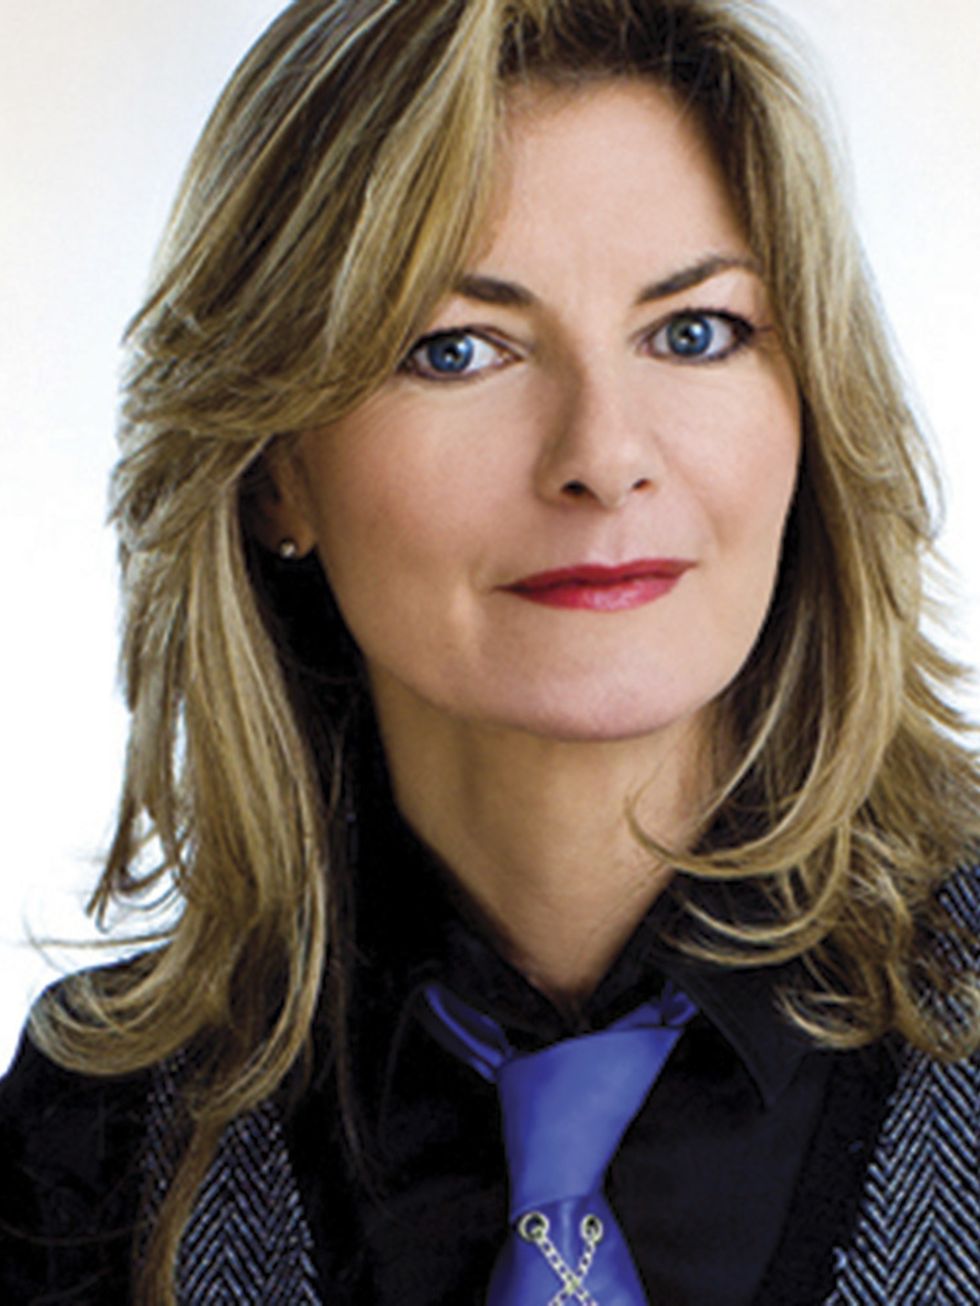 <p><strong>COMEDY: Jo Caulfield at the Comedy Store </strong></p>

<p><span style="line-height:1.6">Nominated as one of the best female comics in the country, panel show regular Jo Caulfield is heading to the Comedy Store with her unique brand of sharp hu